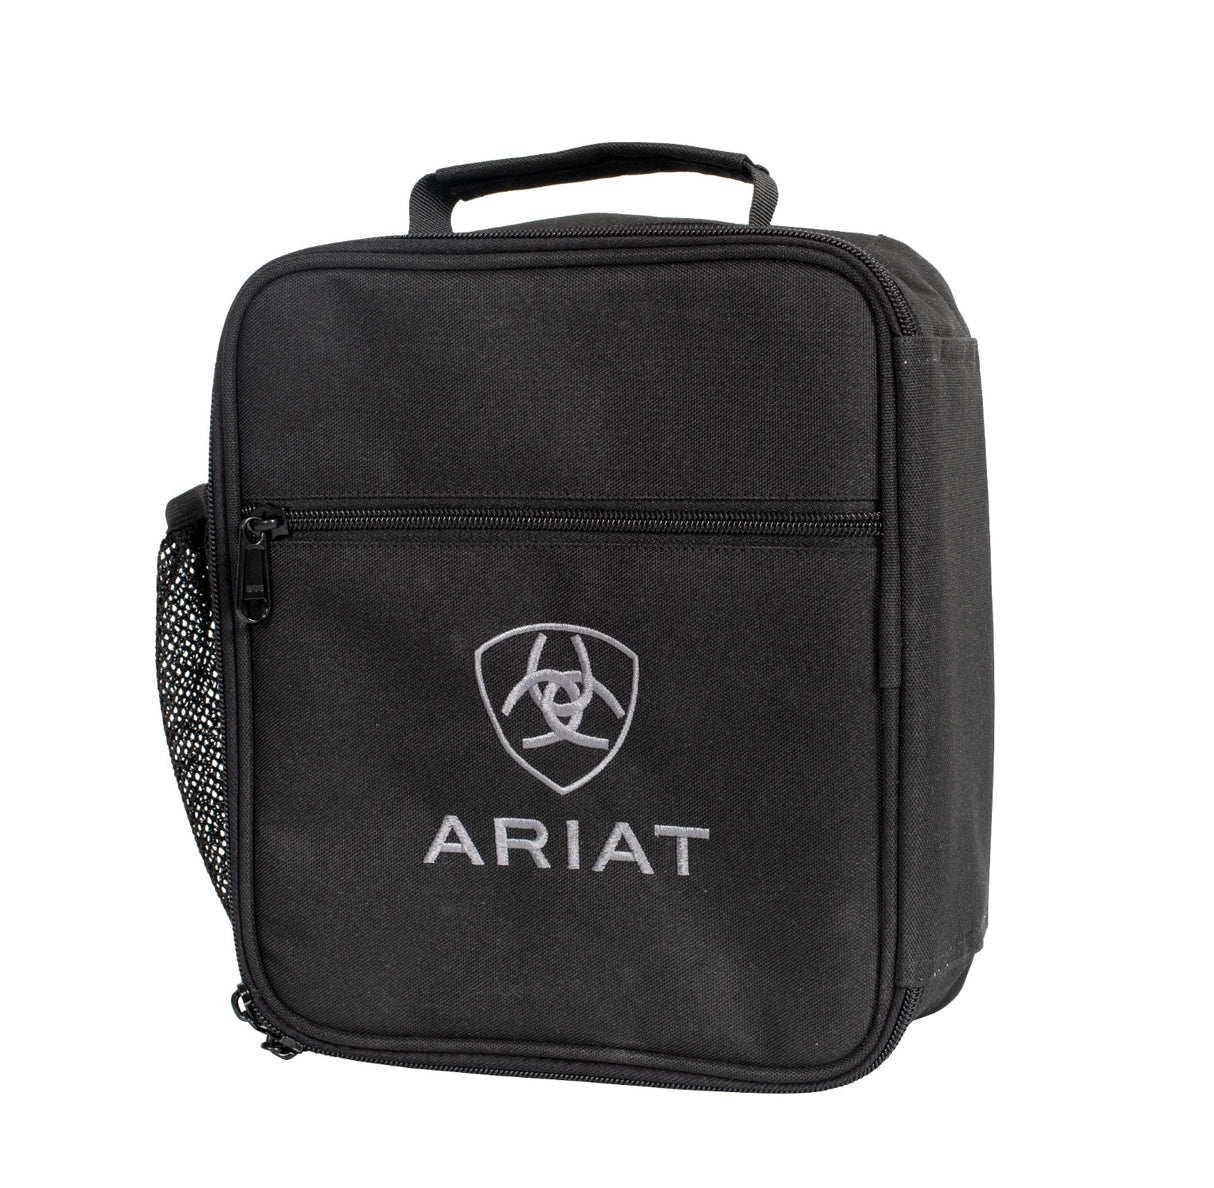 Ariat Lunch Box 2 Colours